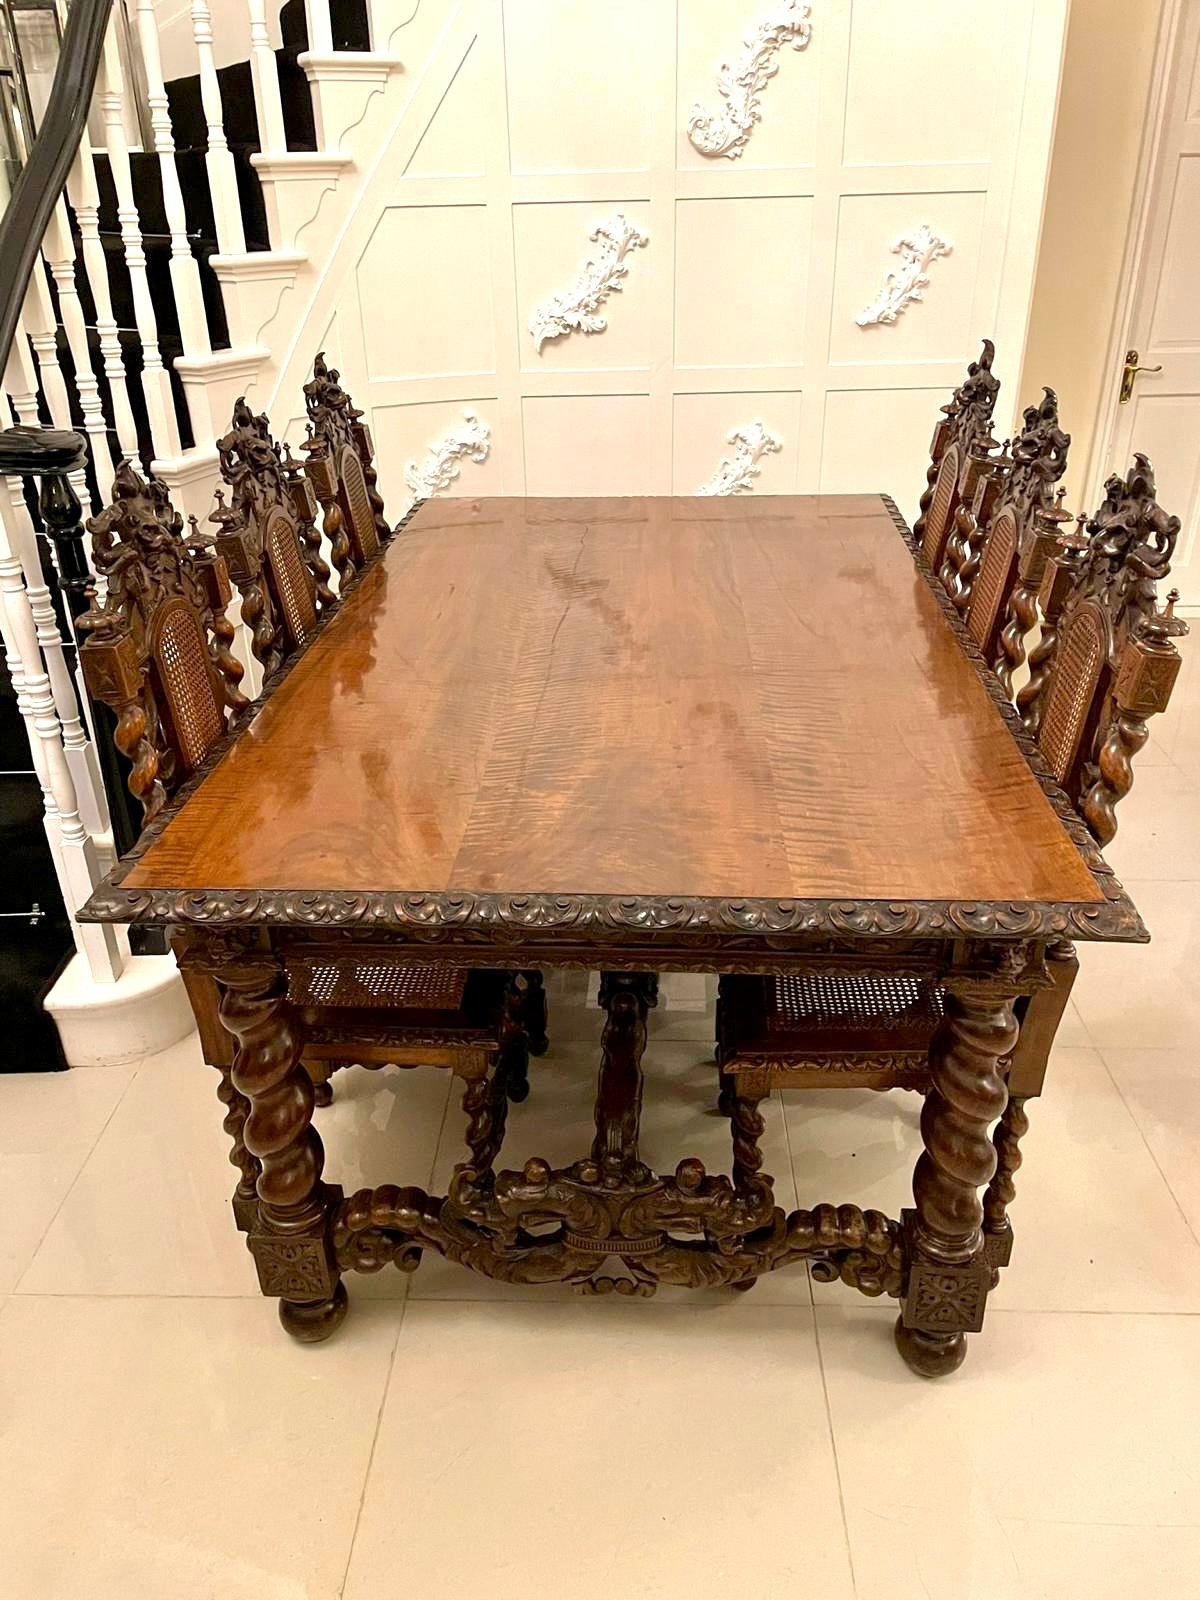 Exhibition Quality Antique Victorian Italian Carved Walnut Centre/Dining Table In Excellent Condition For Sale In Suffolk, GB